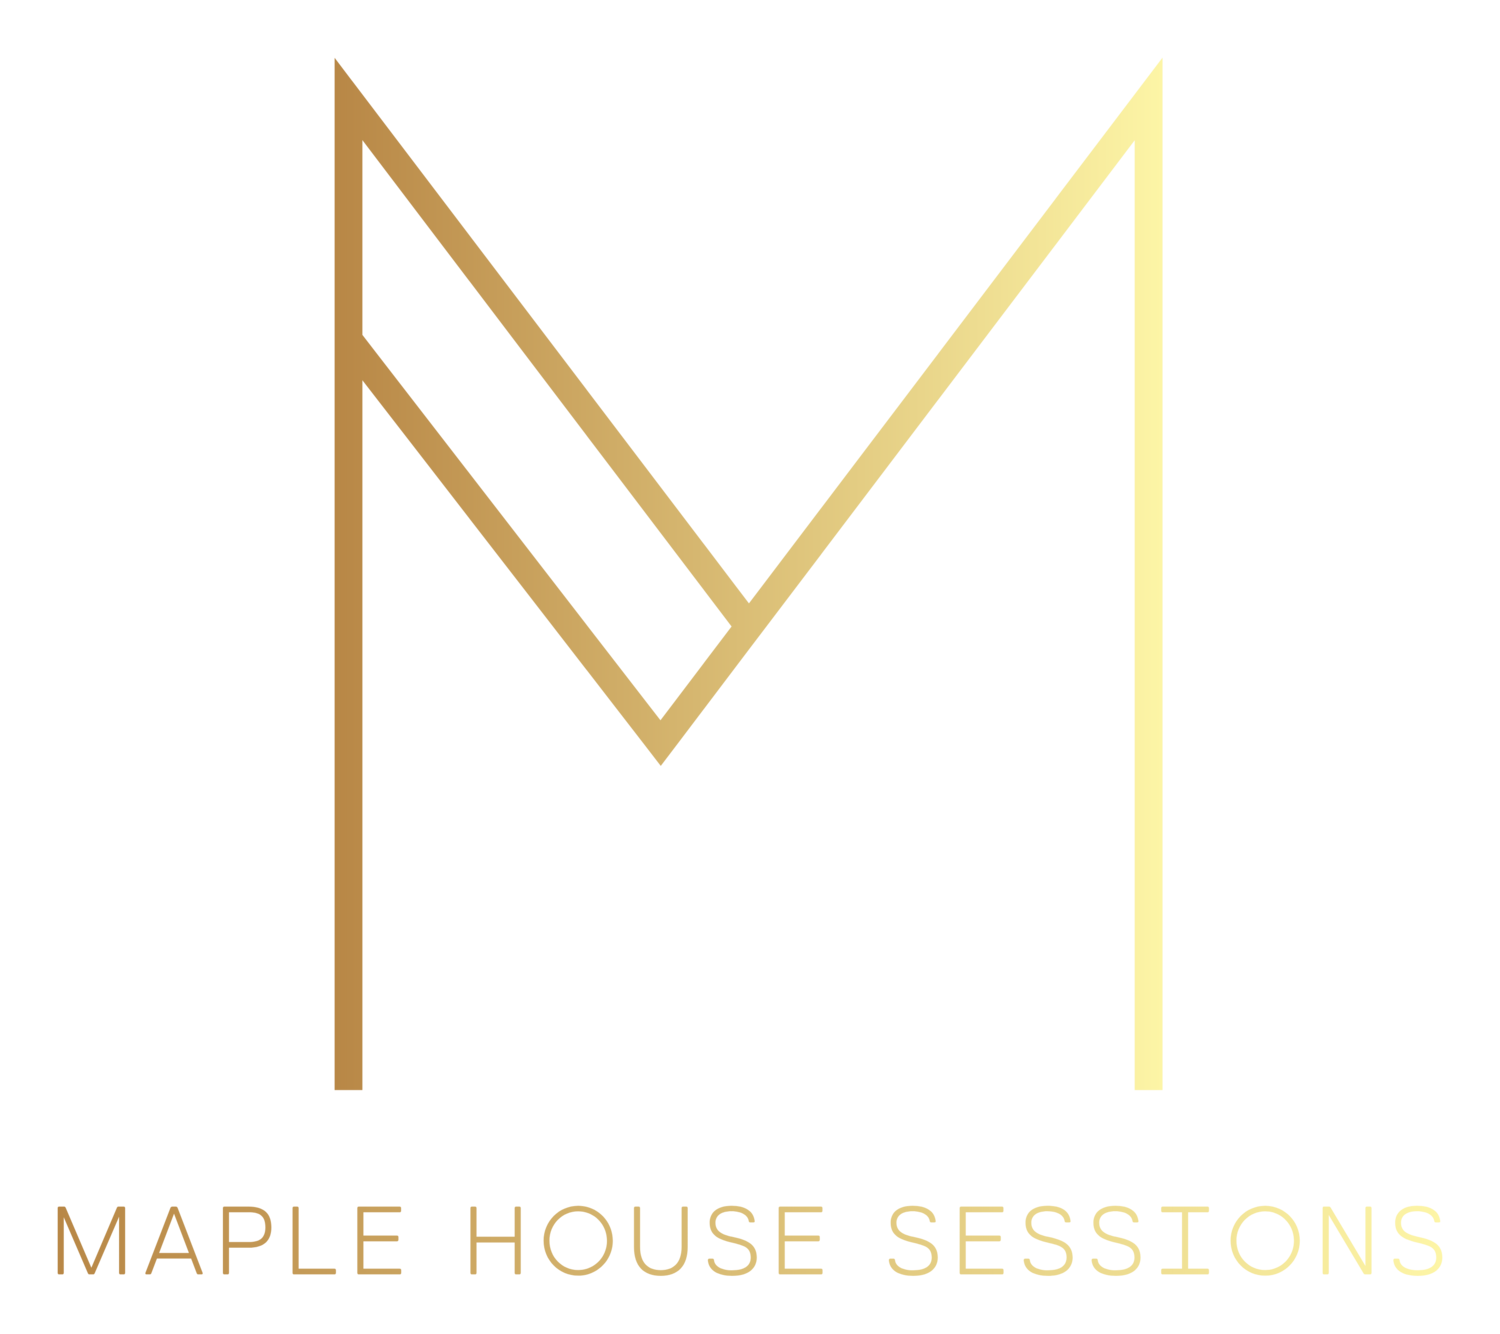 MAPLE HOUSE SESSIONS